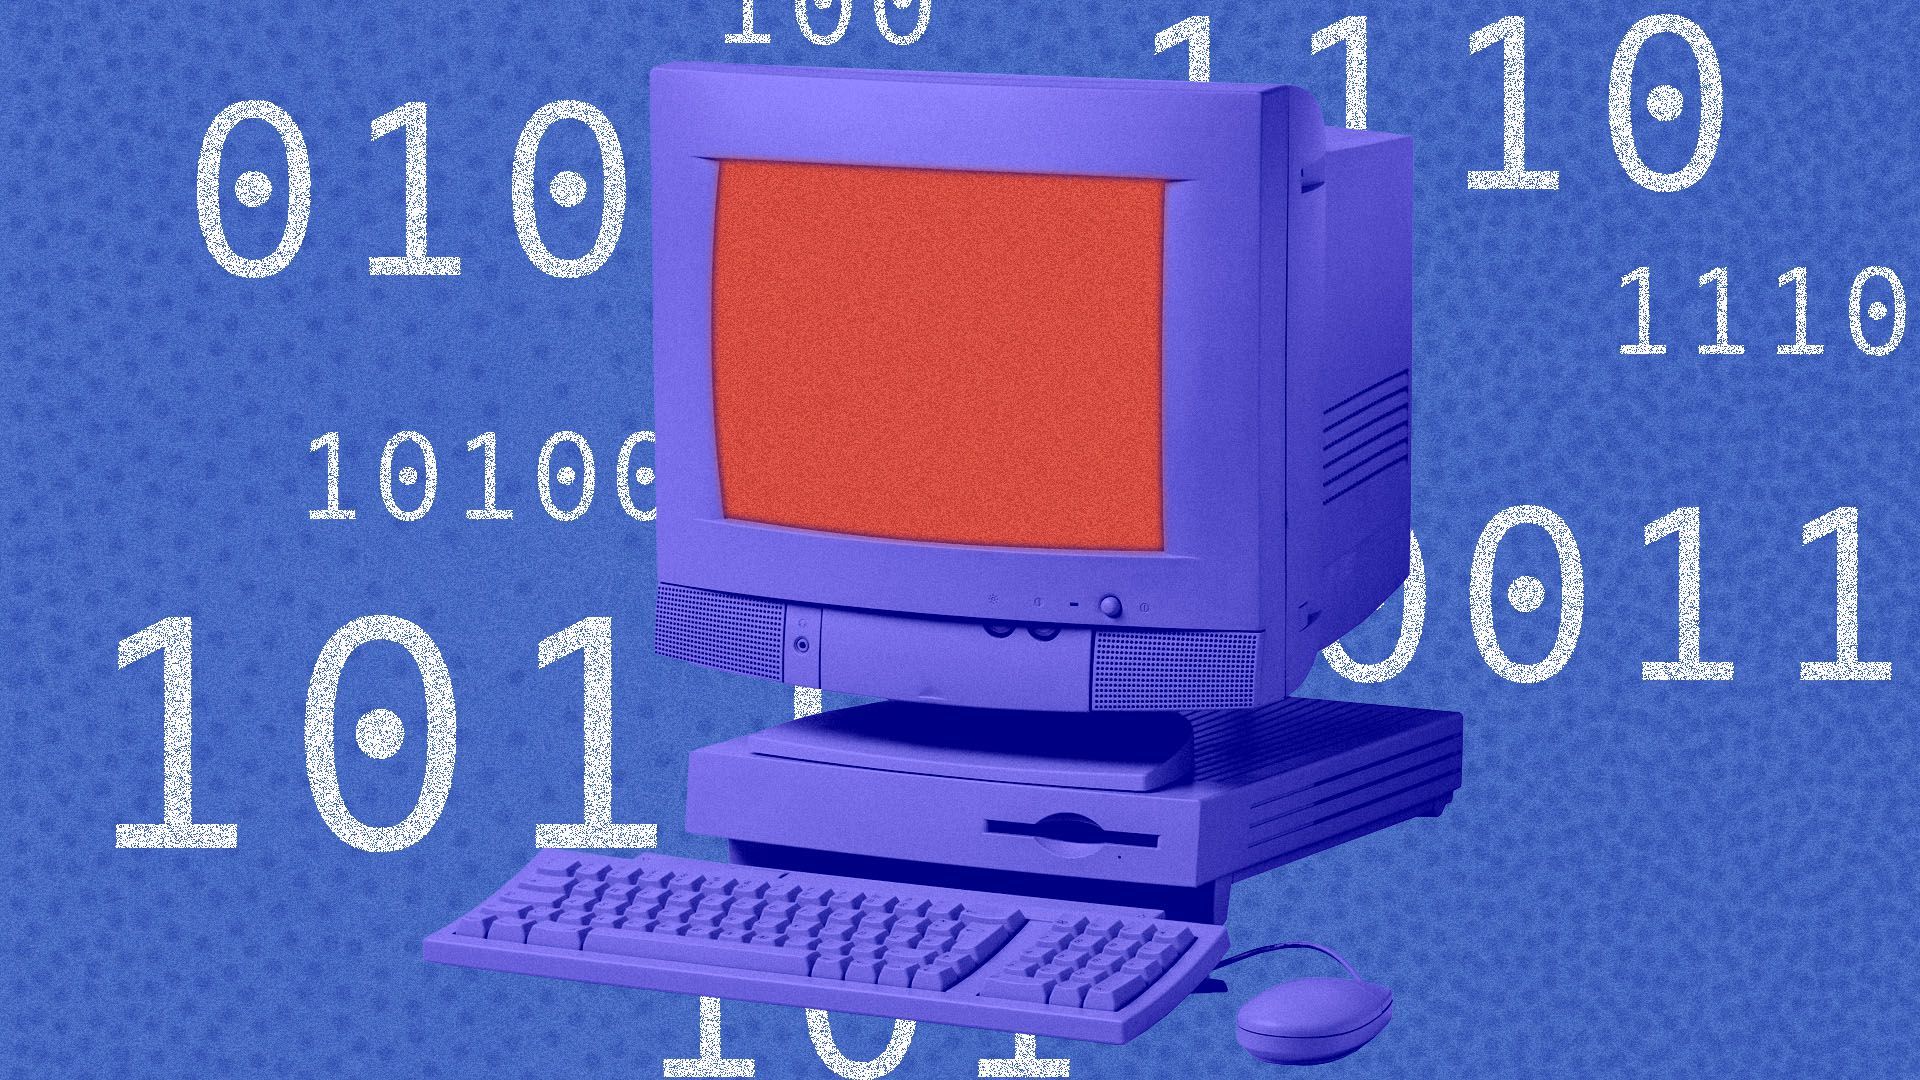 Illustration of a computer with binary code in the background